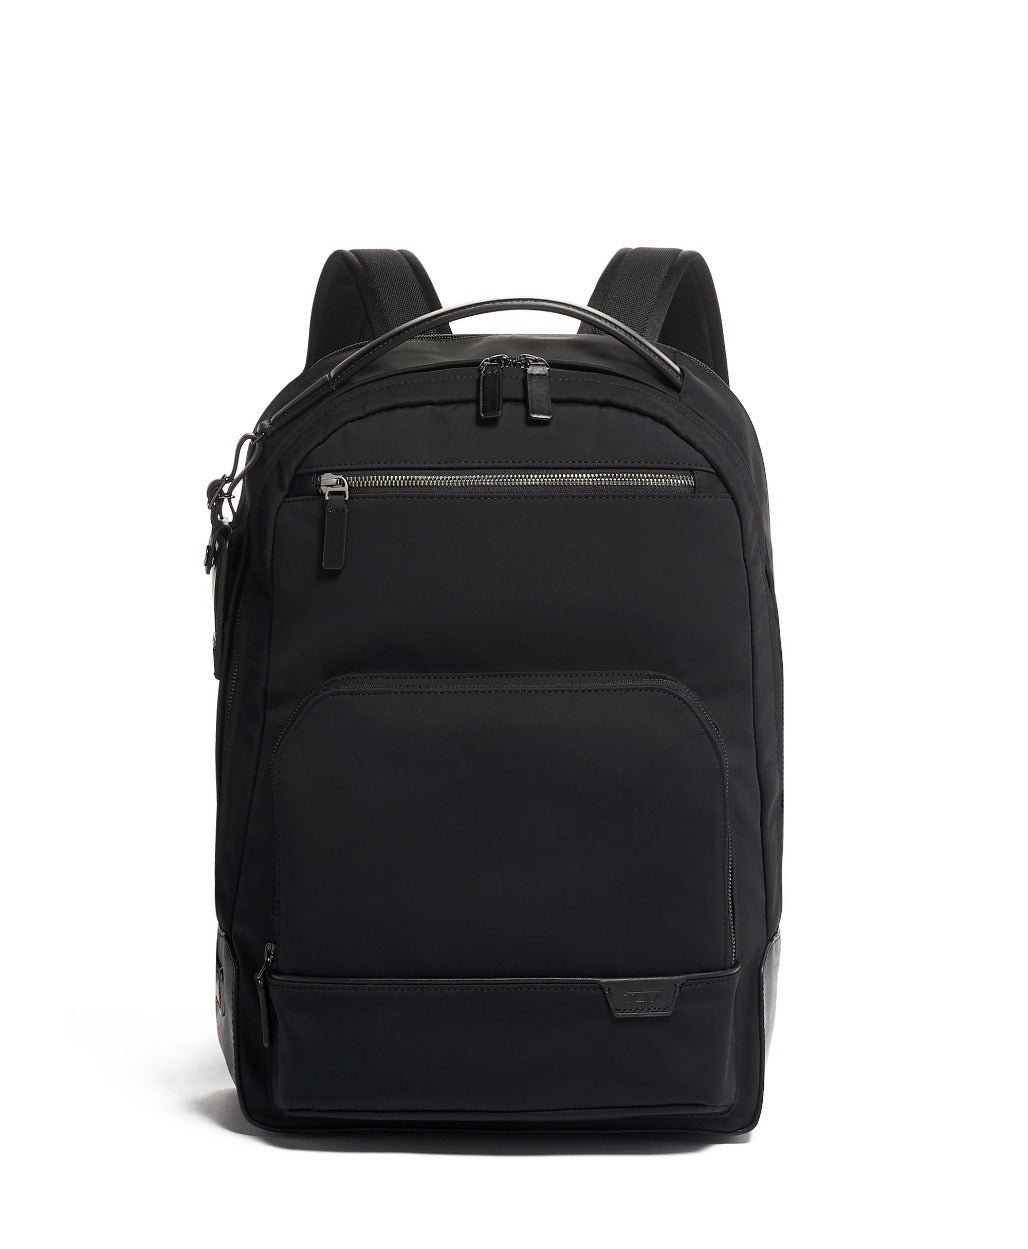 Best laptop backpack for work and travel